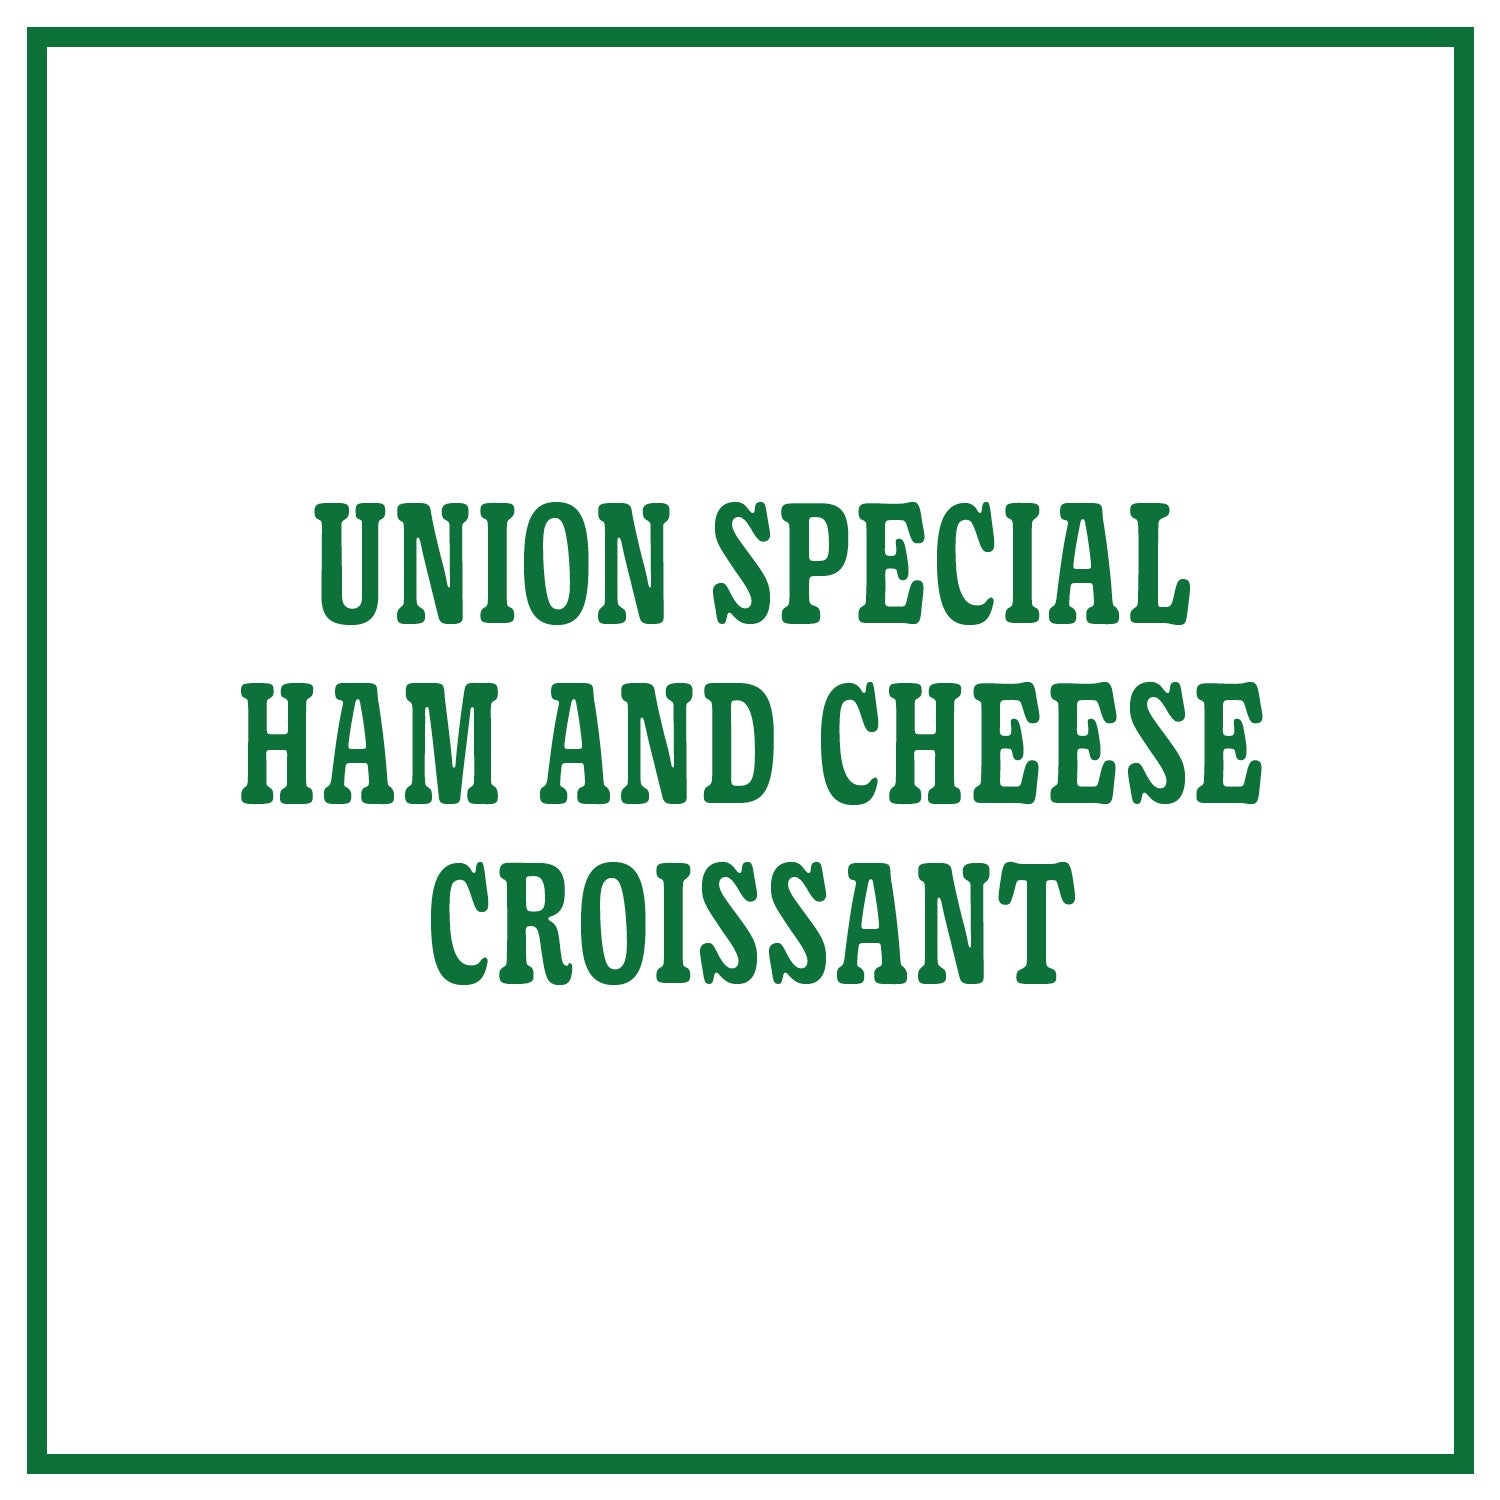 Union Special Ham and Cheese Croissant